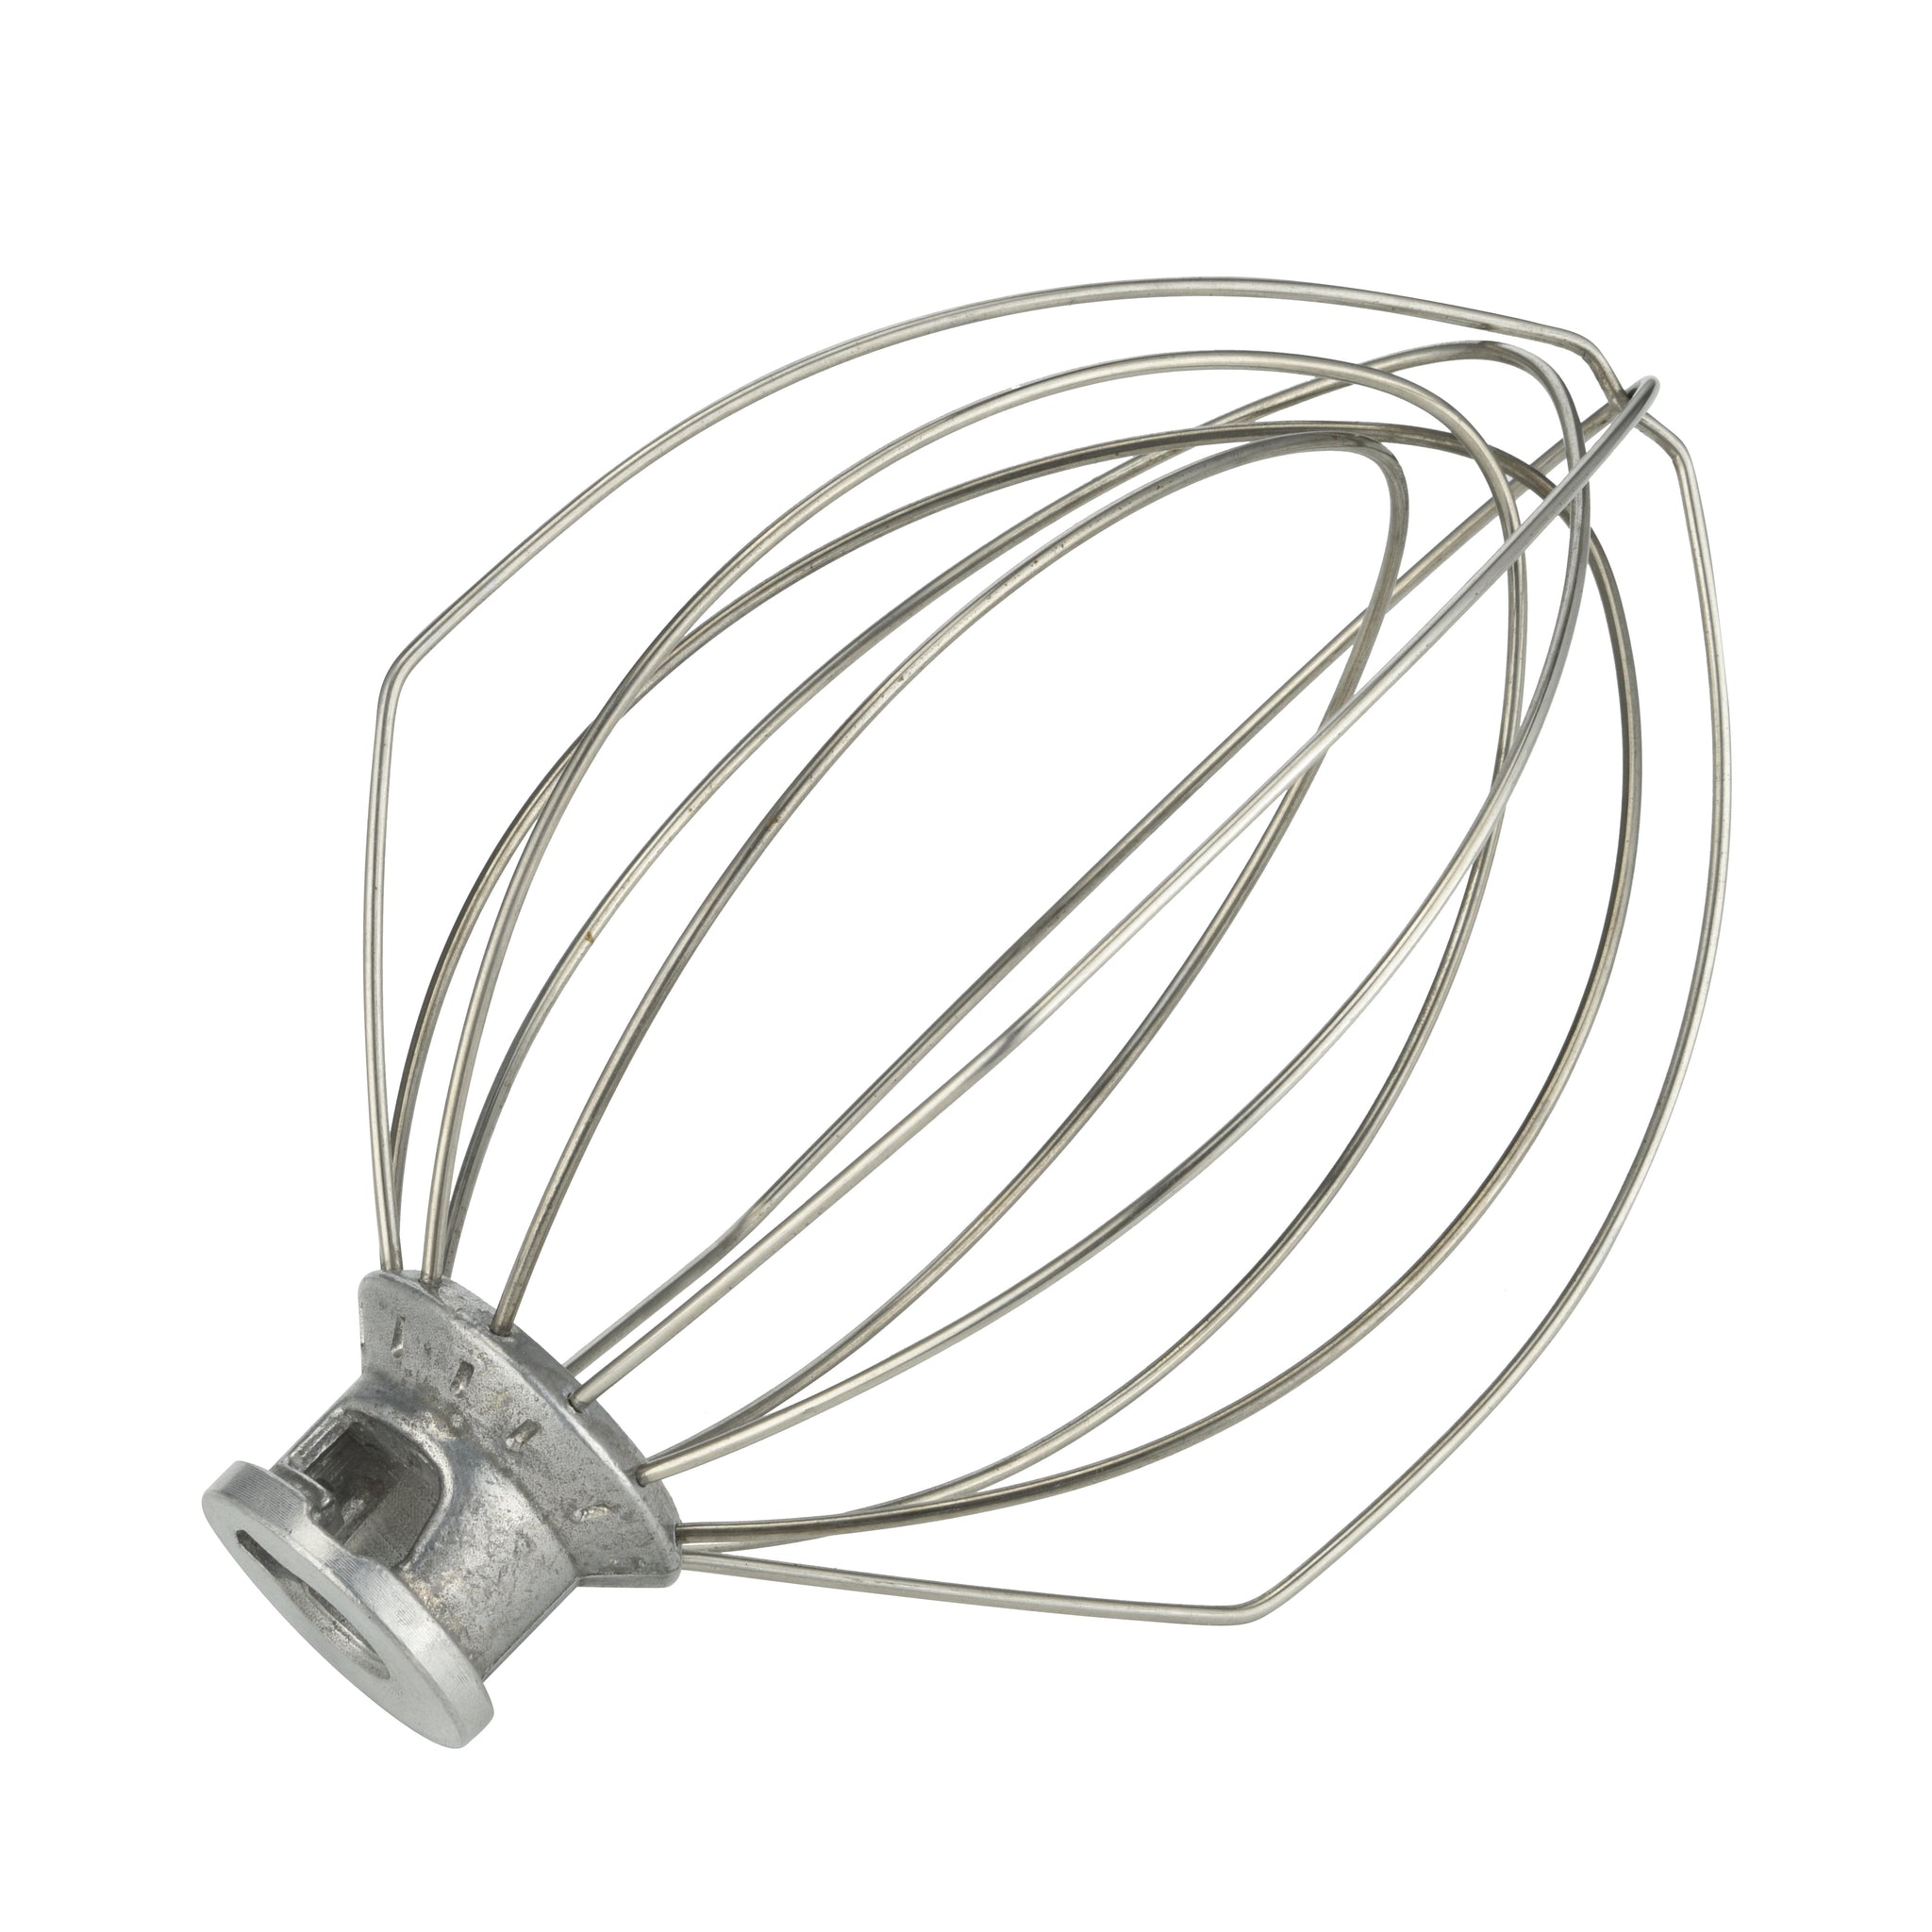 Stand Mixer, 4.5 QT Wire Whip, for KitchenAid, K45WW, 9704329, WP9704329 